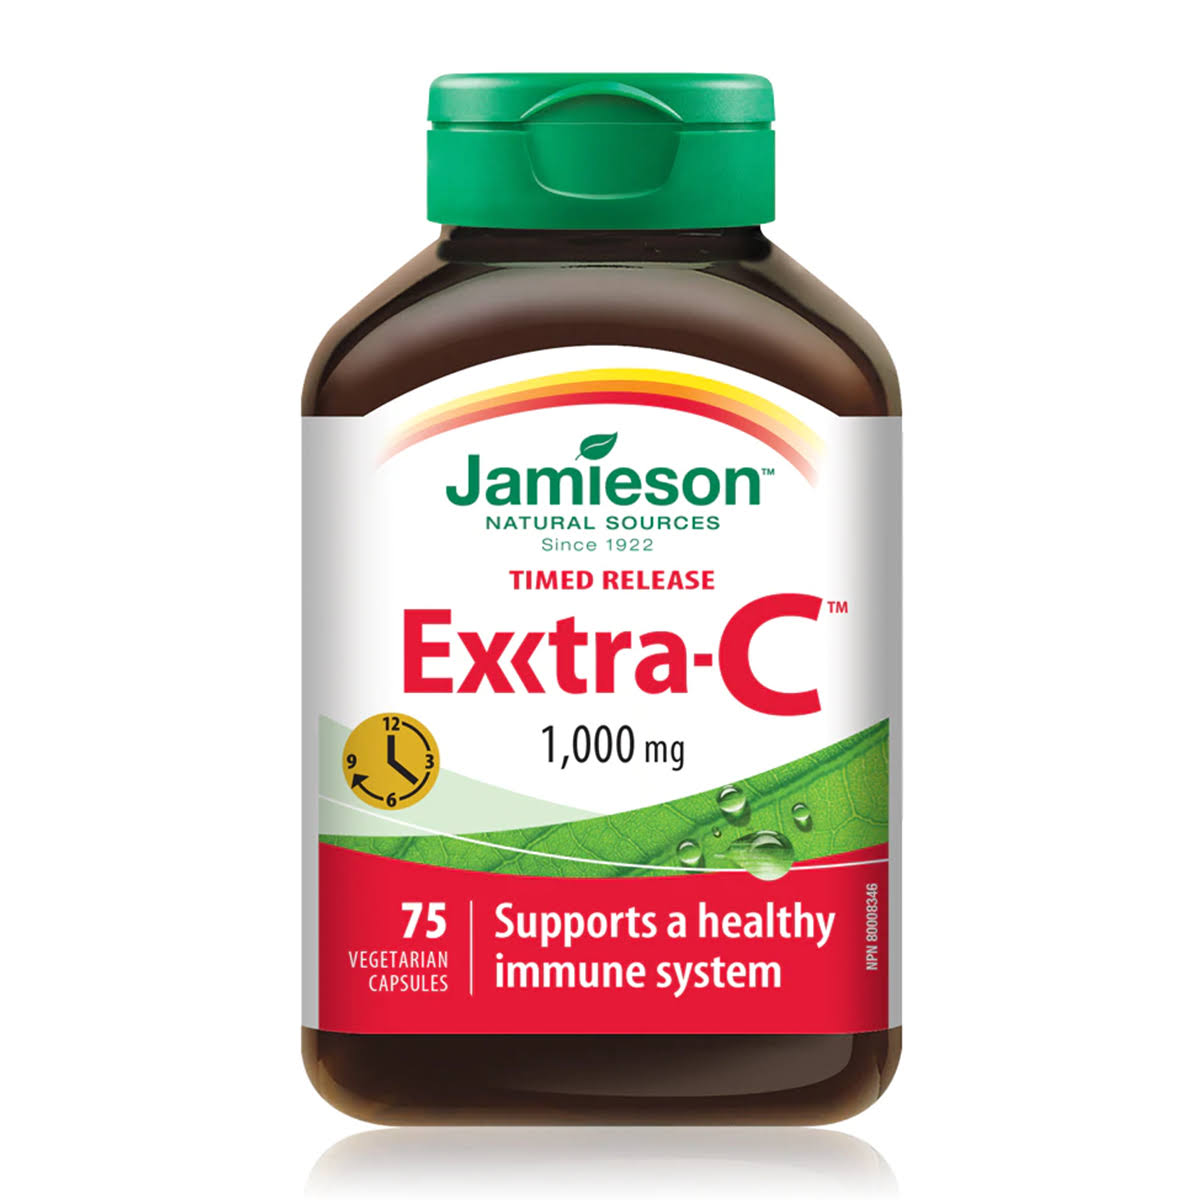 Jamieson Exxtra-C 1000mg Timed Release 75 Capsules